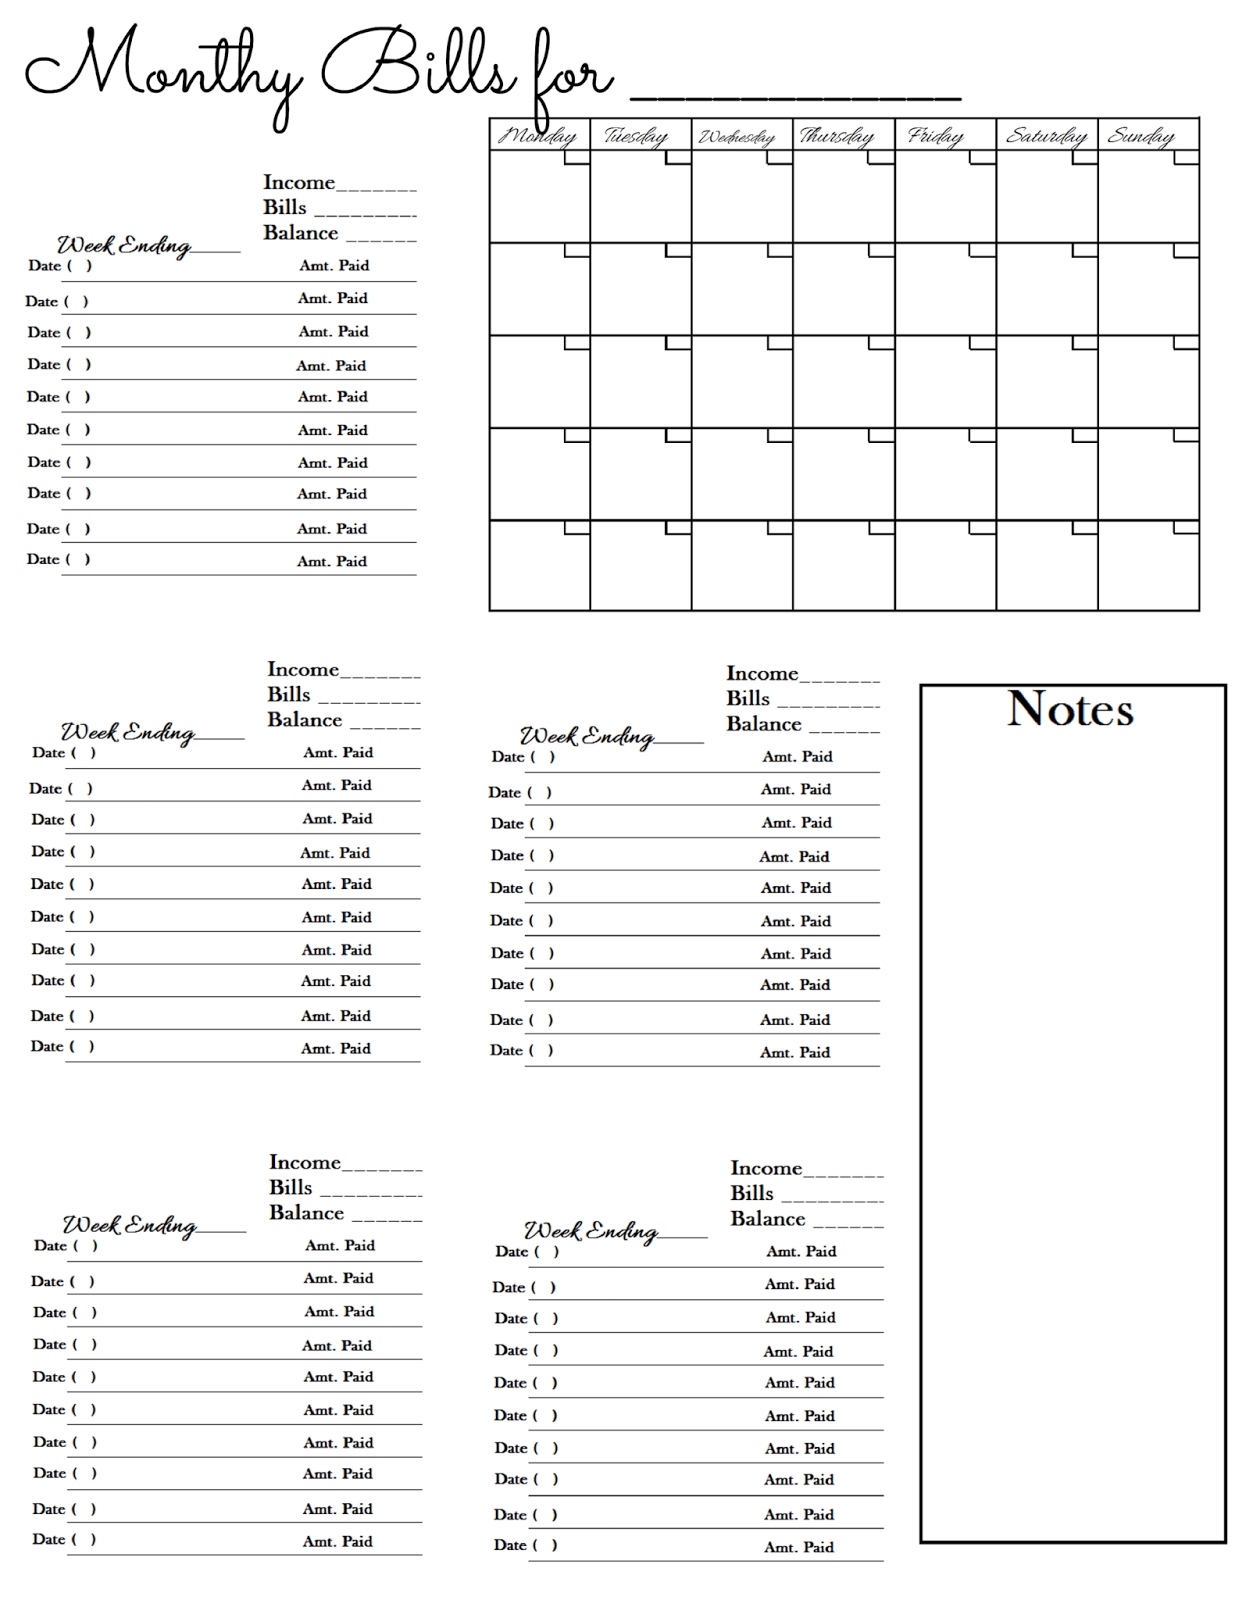 Worksheet To Keep Track Of Paid Monthly Bills | Budgeting  Monthly Pay Bills Worksheet